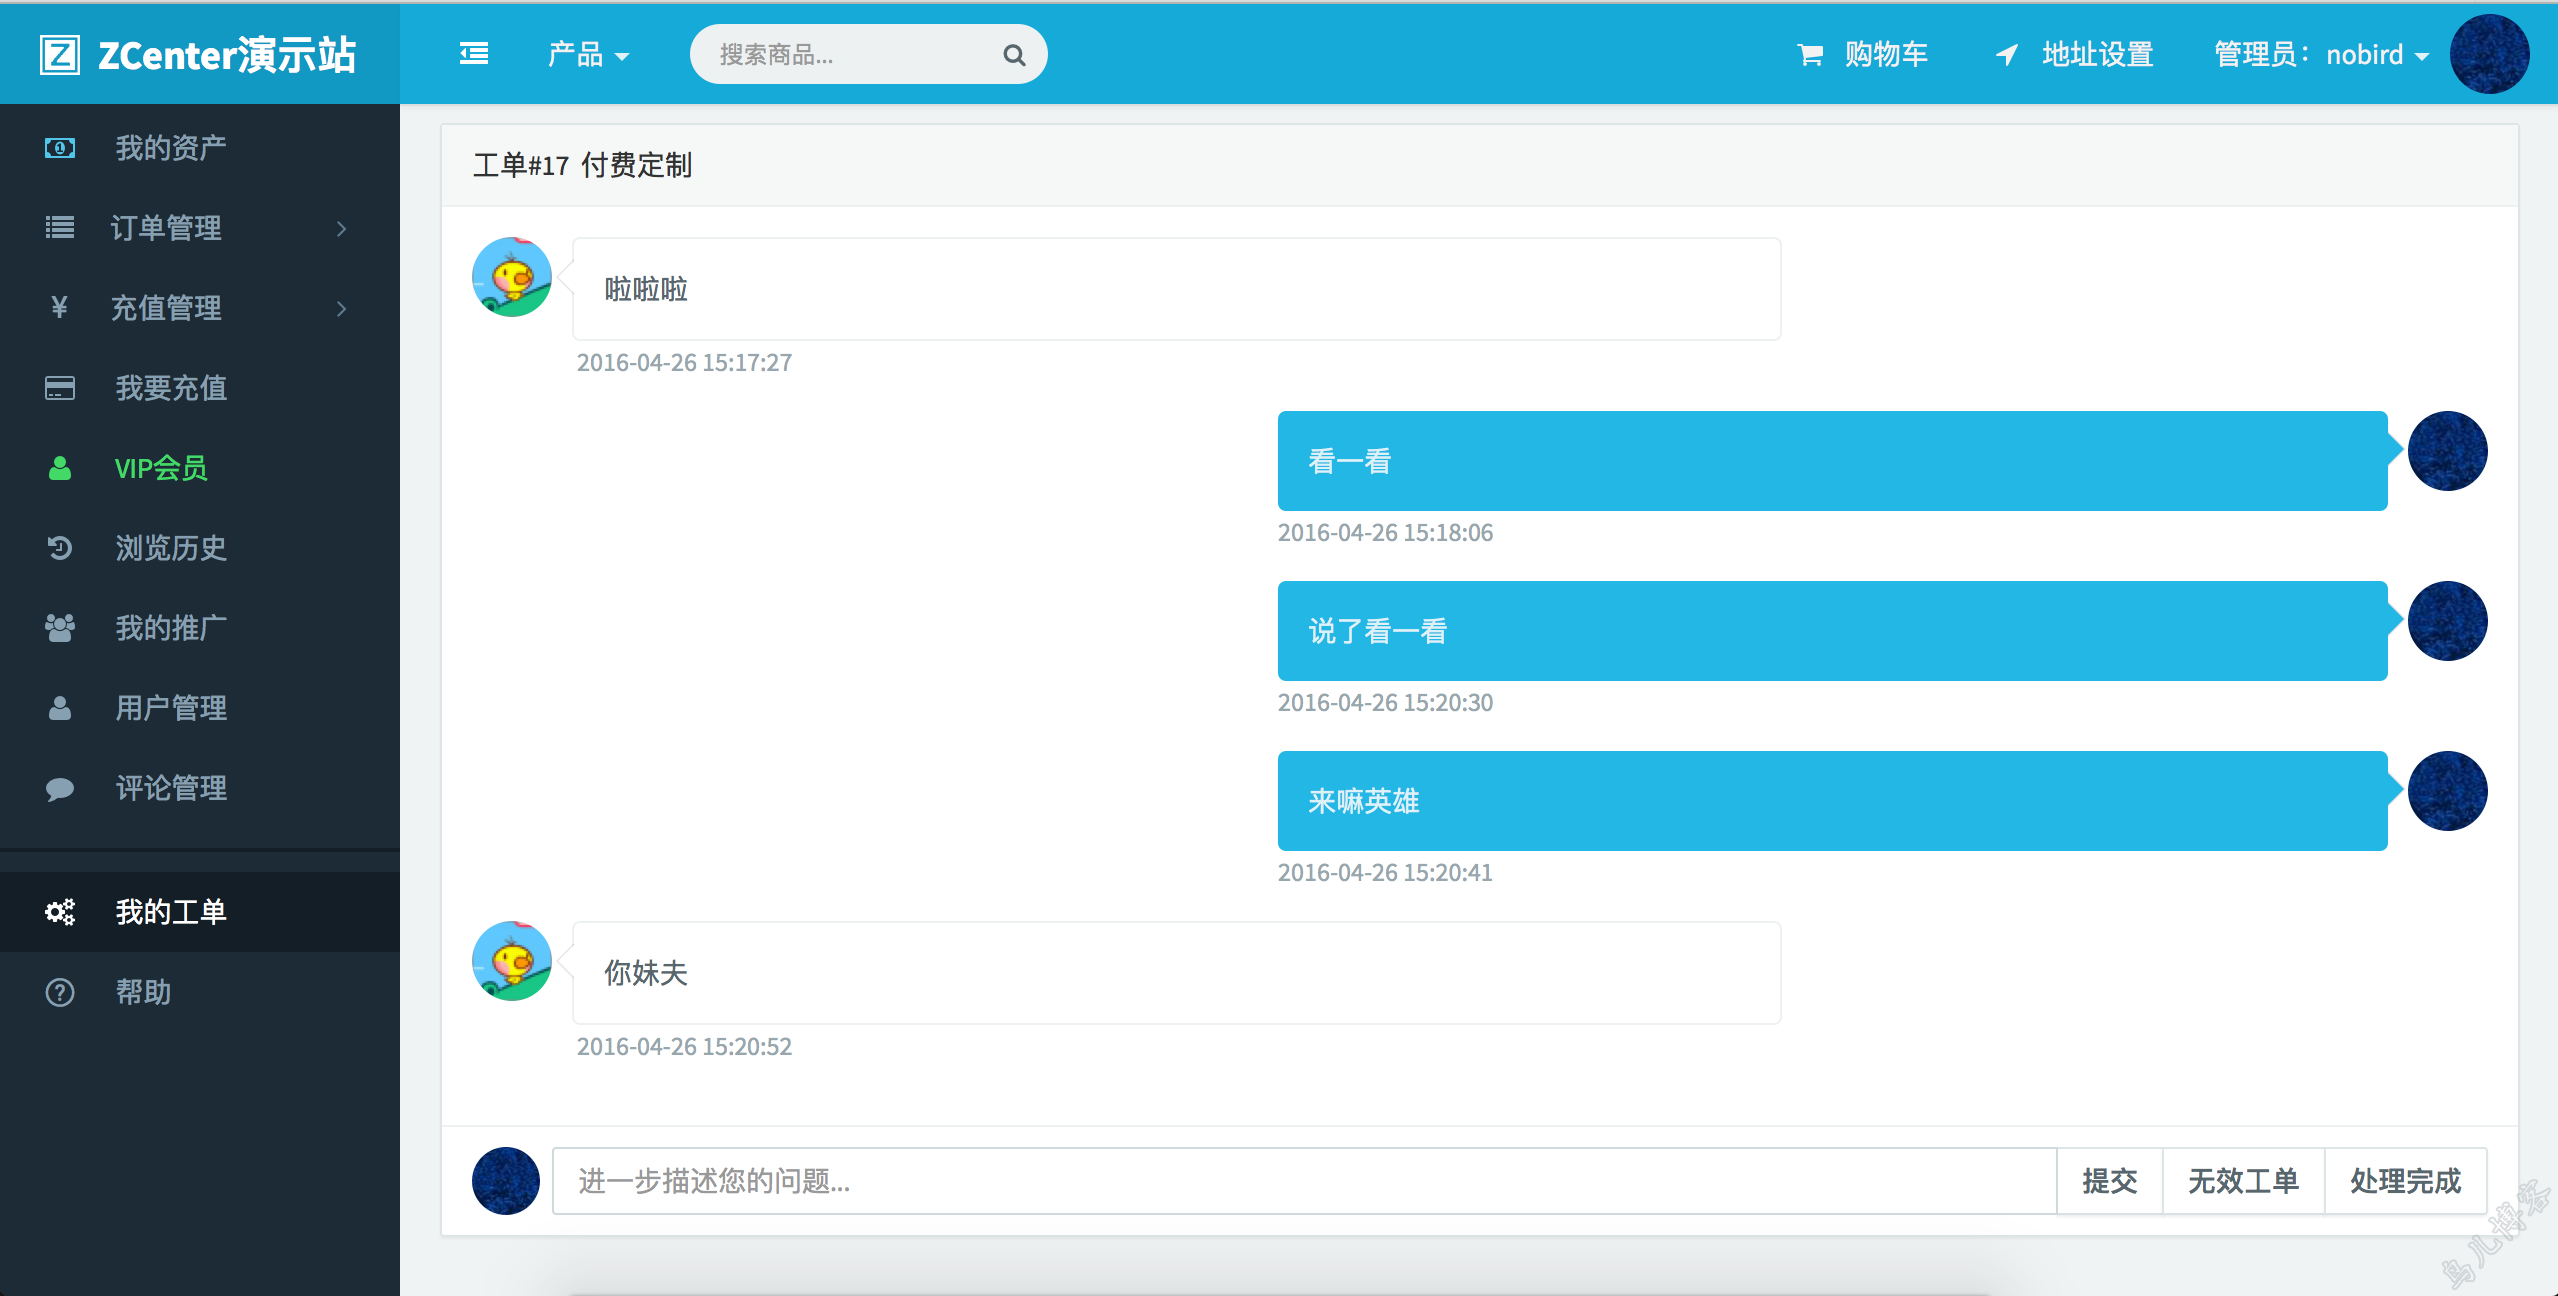  ZBLOG Mall user center plug-in (Alipay, WeChat, Tenpay, PayPal, cloud payment, code payment)